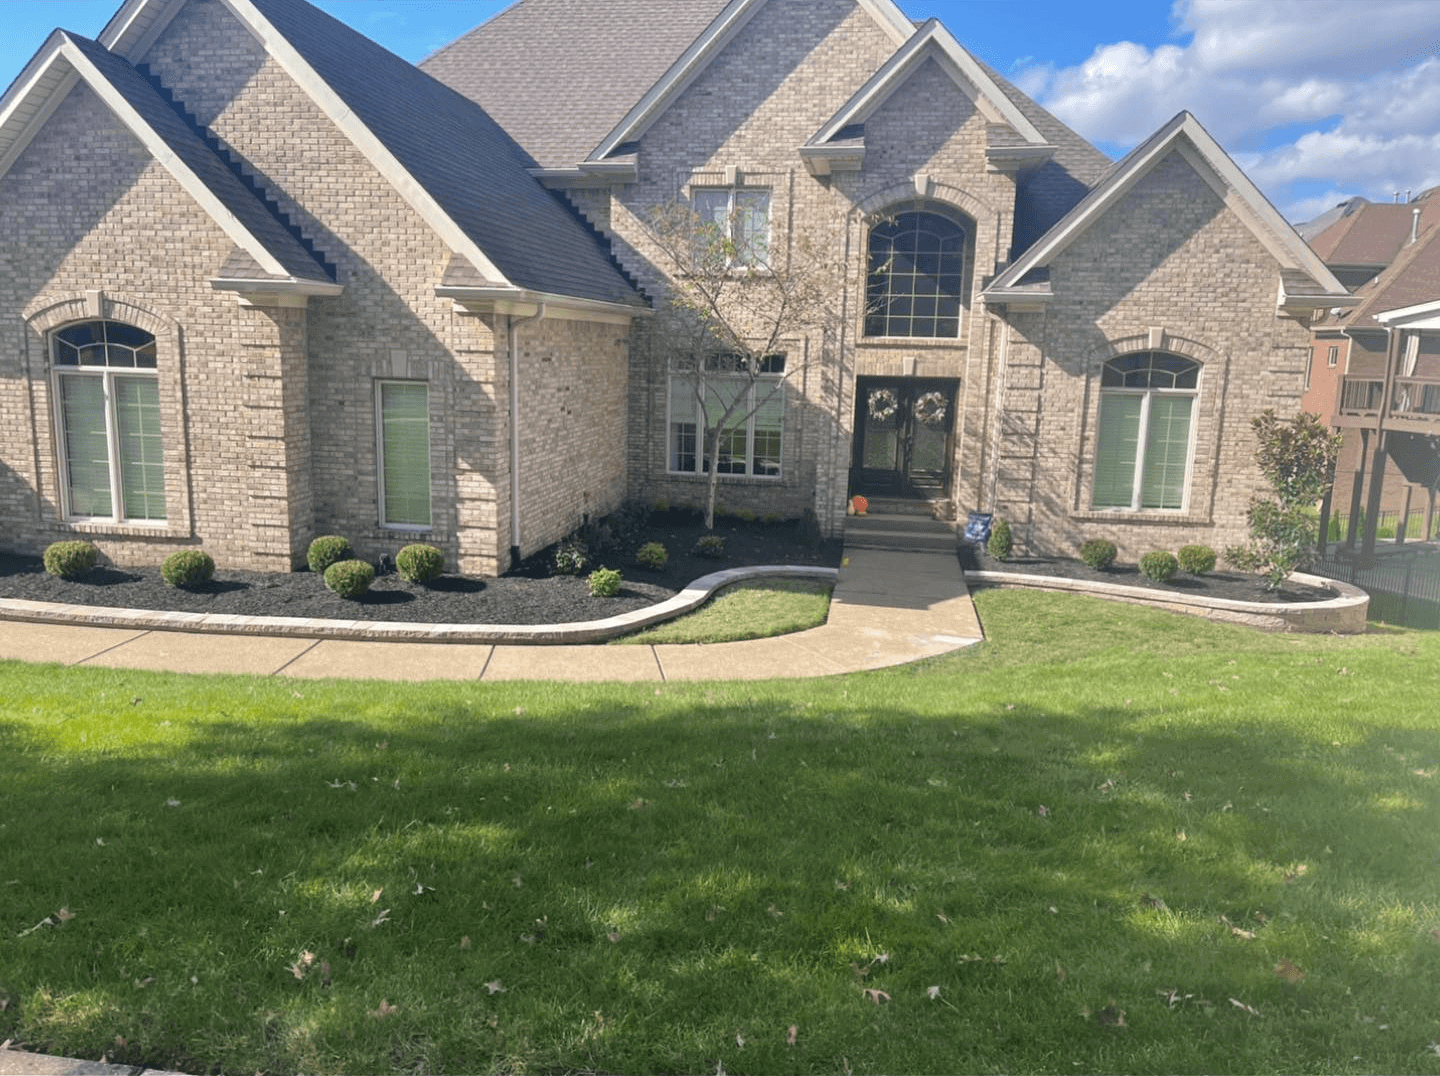 MowBetter-Lawnscapes-Louisville-Gallery-1